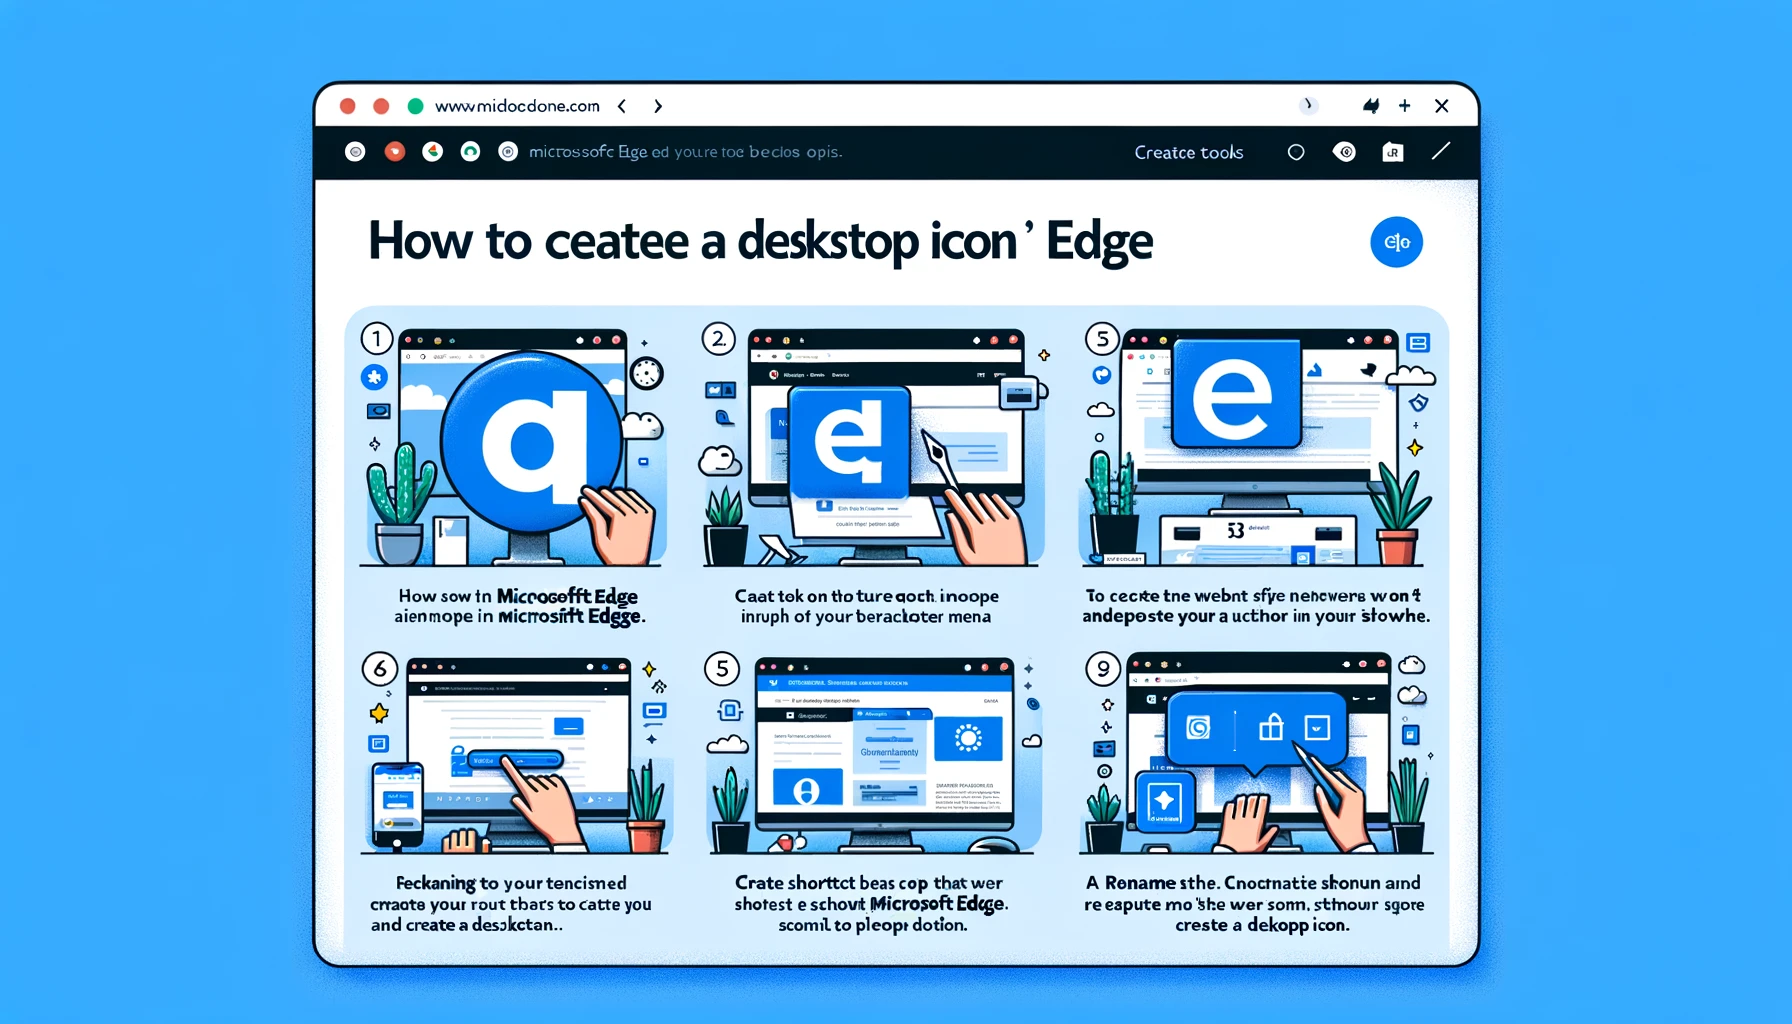 infographic guide on how to create a desktop icon in Microsoft Edge